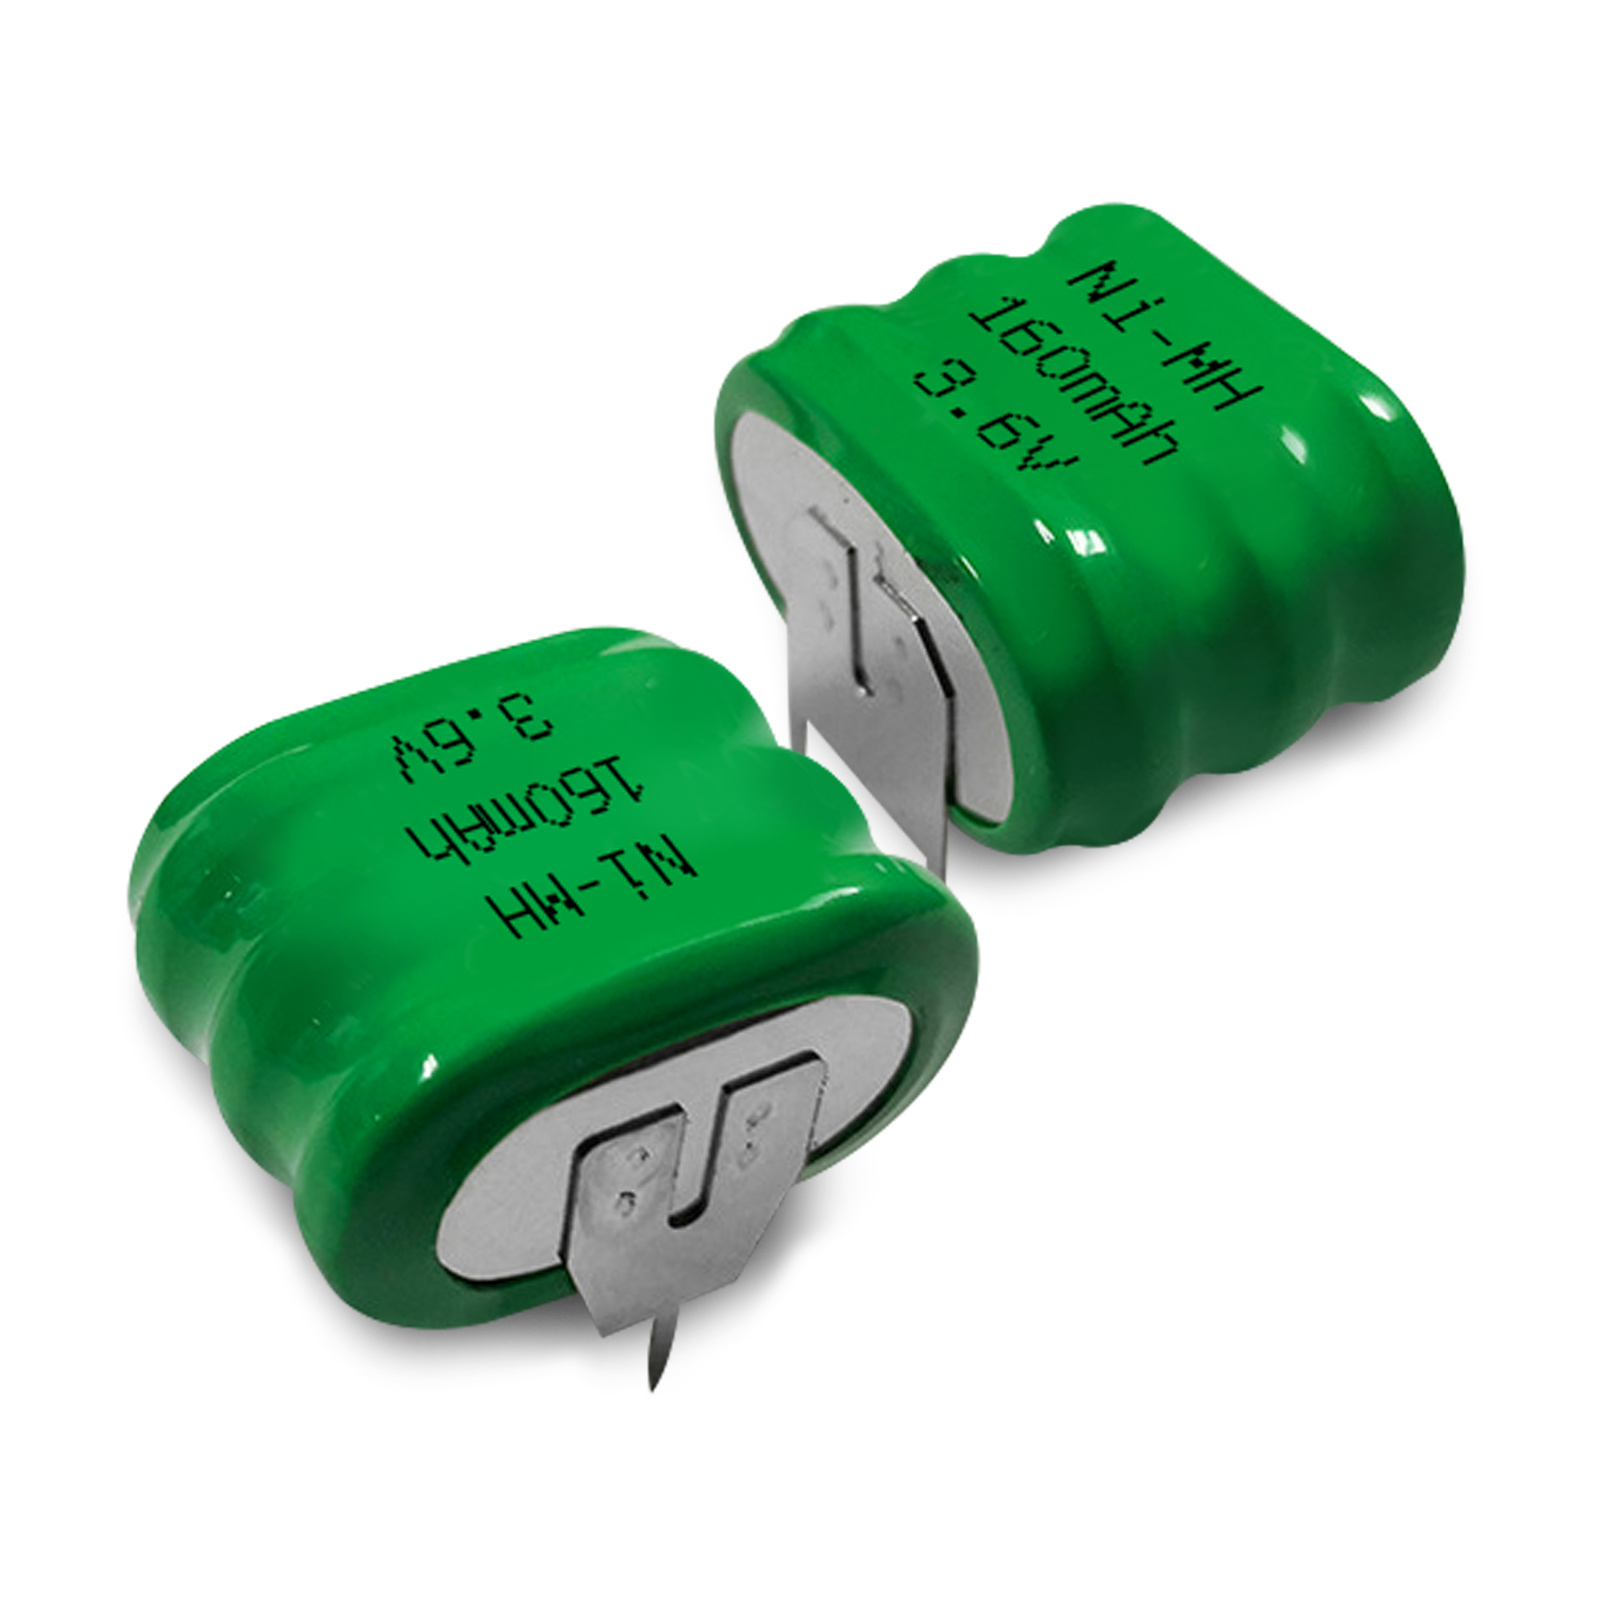 JINTION NIMH 160mAh 3.6v rechargeable battery 3.6V 1.2v button cell 200mah button cell